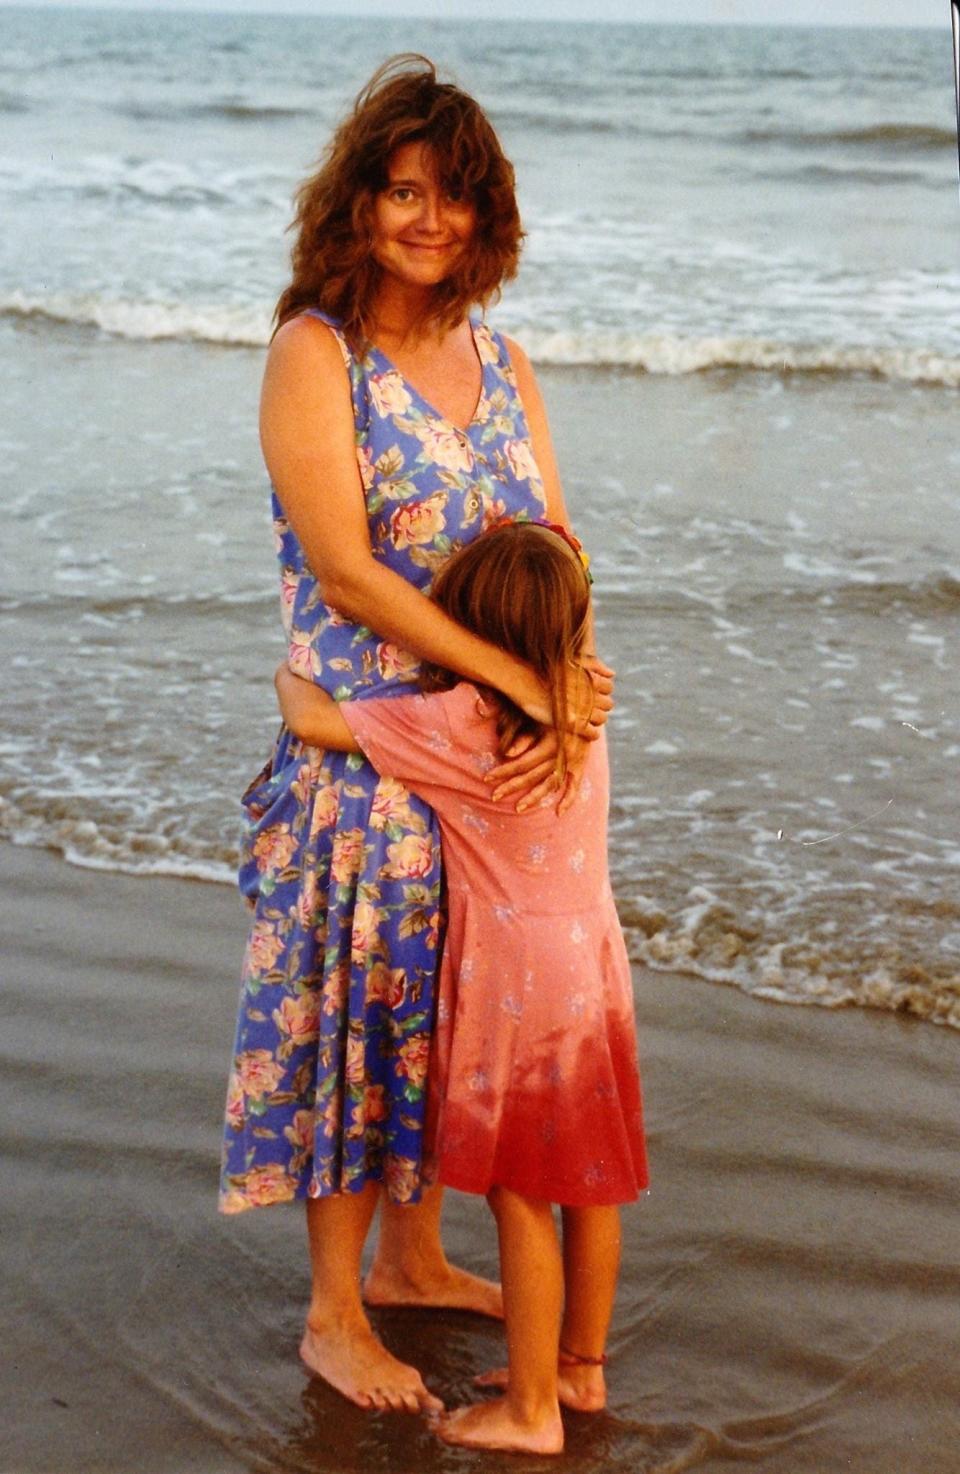 Columnist Connie Schultz was a single mom for most of her daughter's childhood.